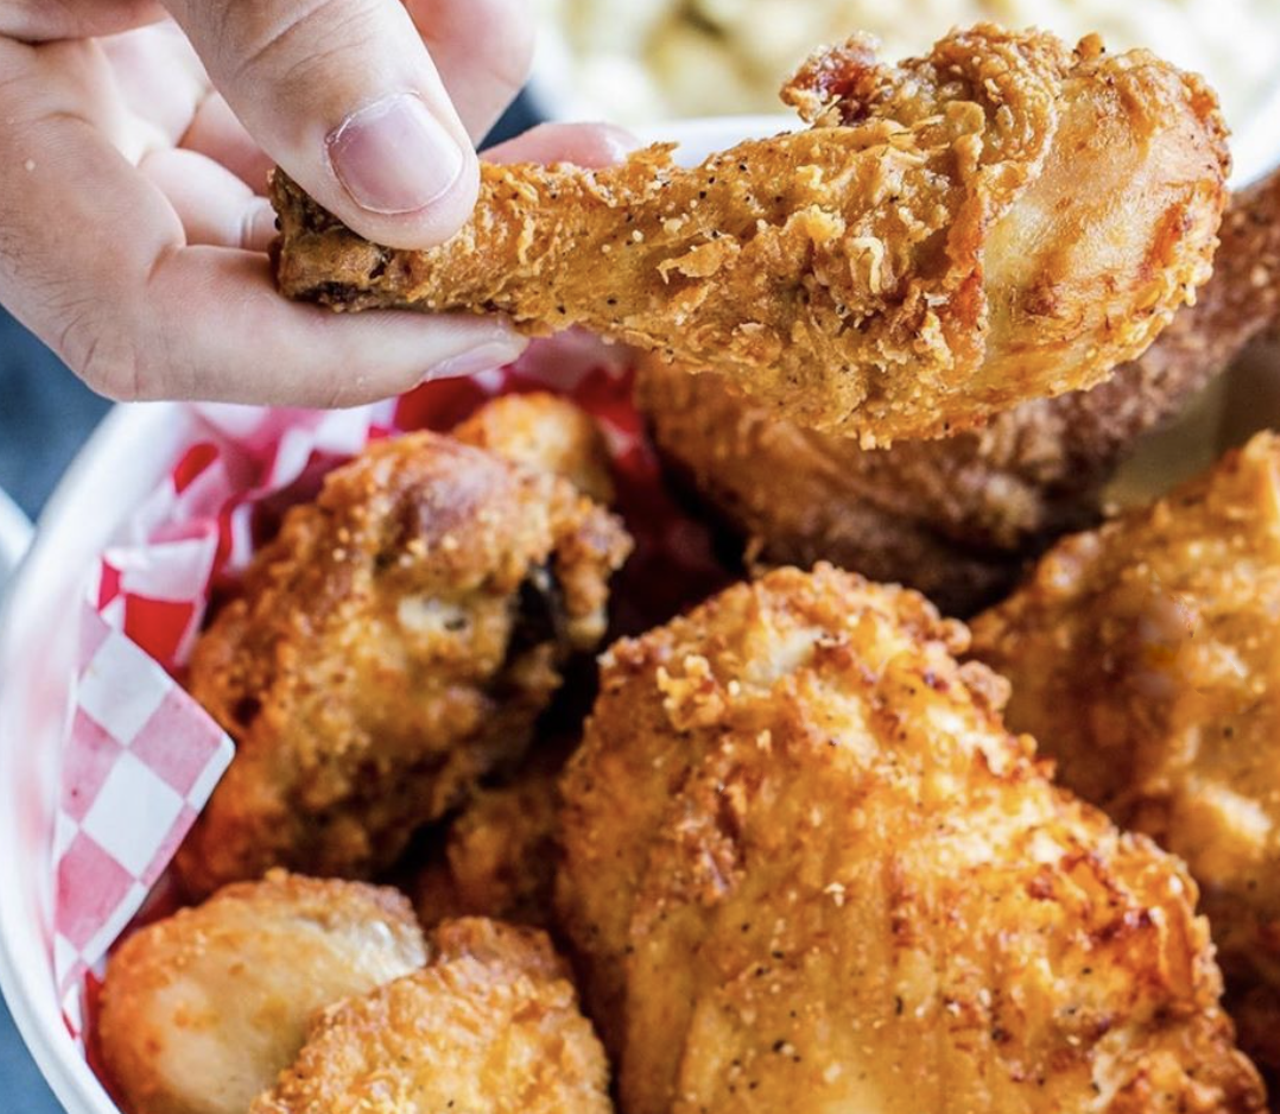 Max’s Wine Dive Fried Chicken 
Crispy and juicy, Max’s fried chicken rarely disappoints. Hint: pound a chicken breast flat and follow this recipe for homemade chicken on a stick!
Find the recipe here.
Photo via Instagram/  maxswinedive